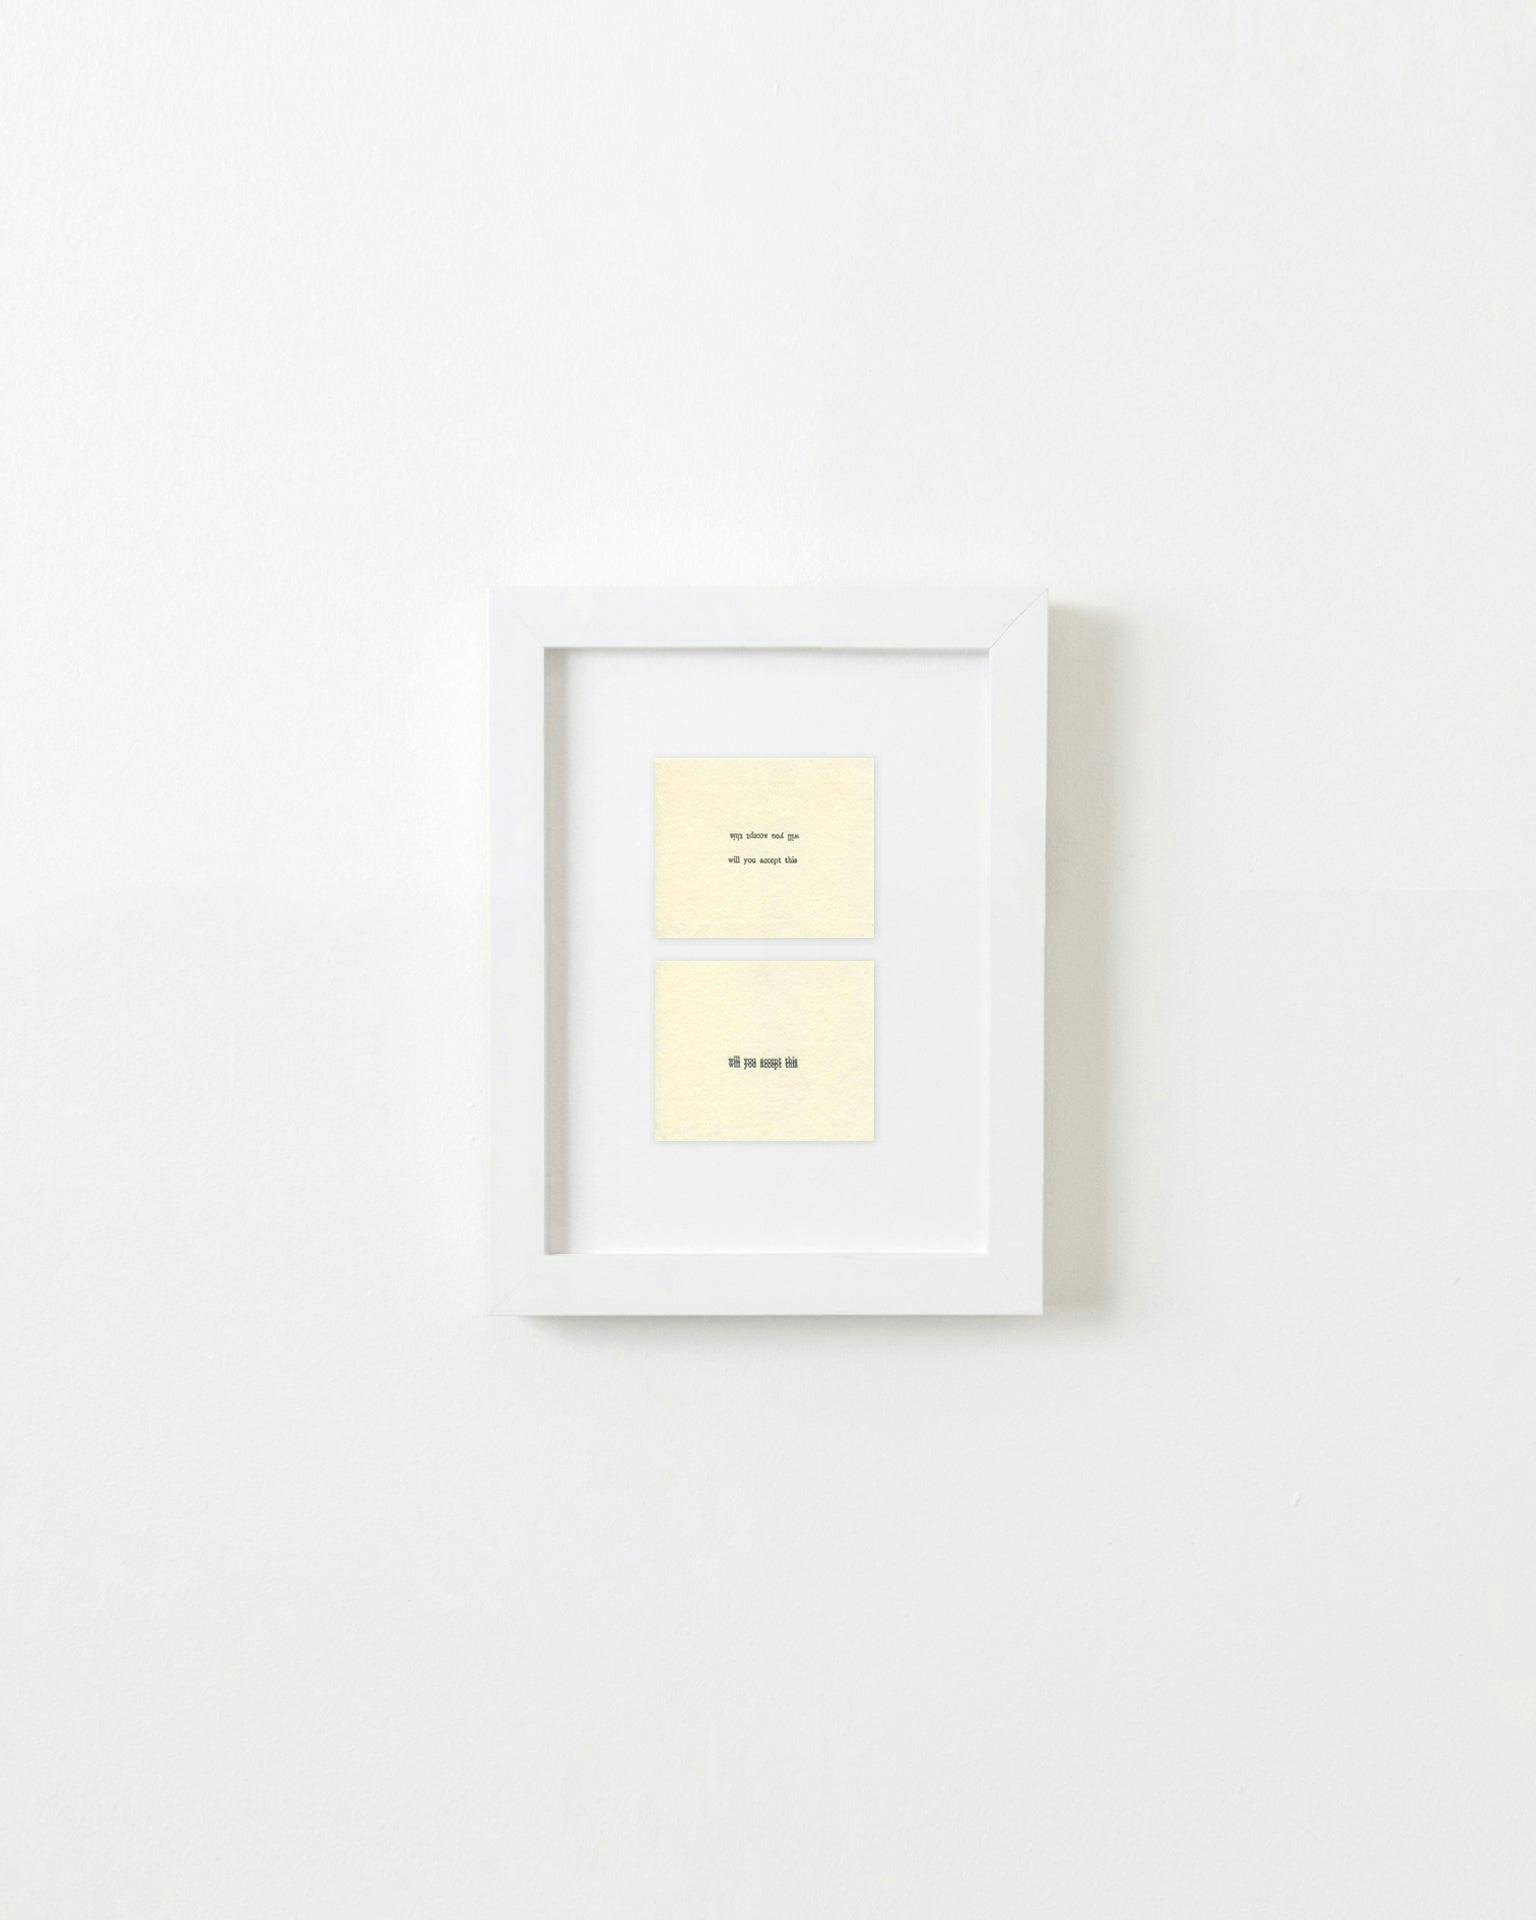 Alyson Provax - Untitled (will you accept this) - Print